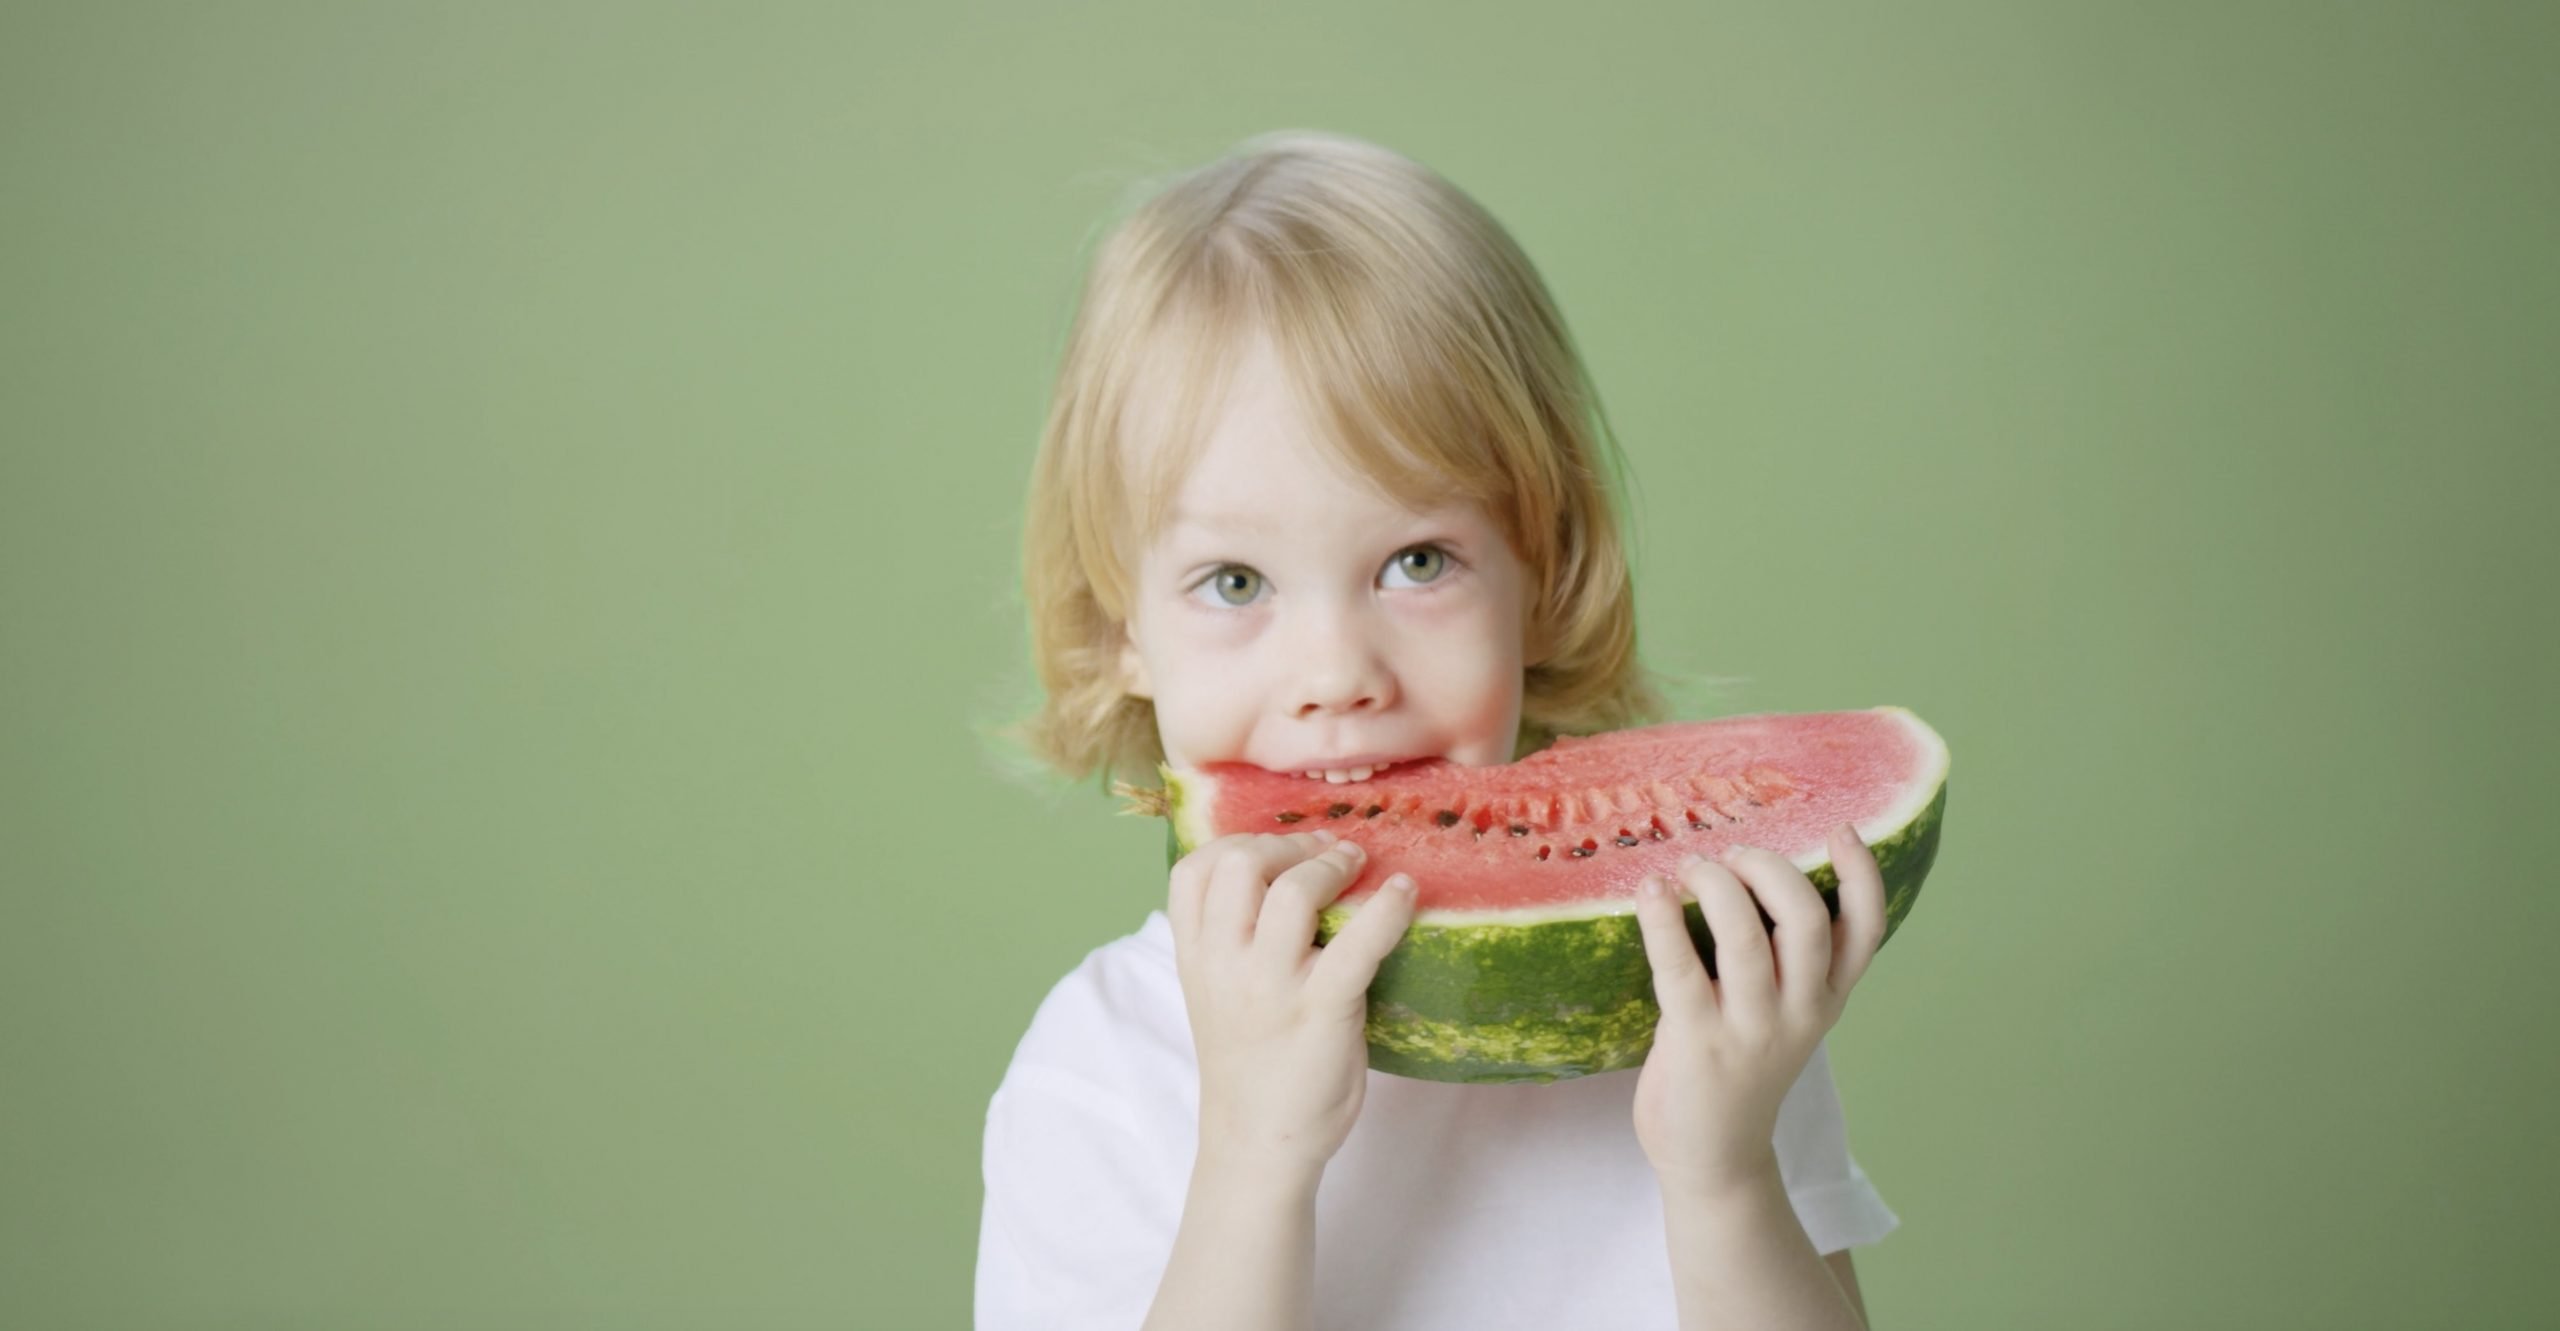 A young boy joyfully holds a slice of watermelon, savoring its refreshing taste on a sunny day.